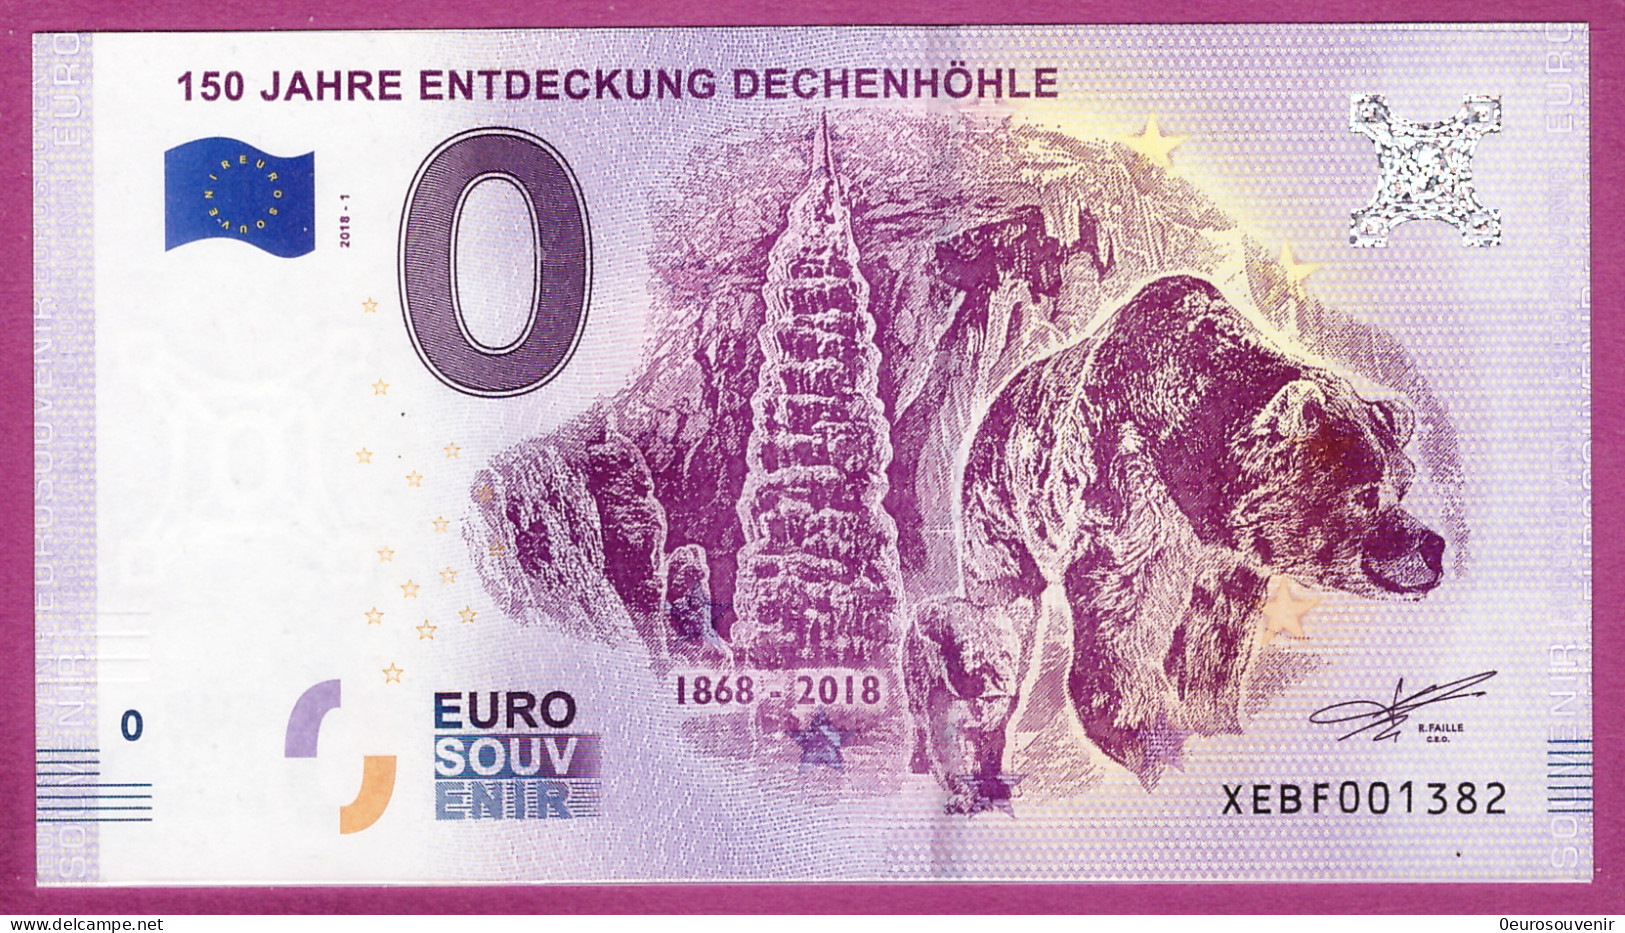 0-Euro XEBF 2018-1 150 JAHRE ENTDECKUNG DECHENHÖHLE - Private Proofs / Unofficial